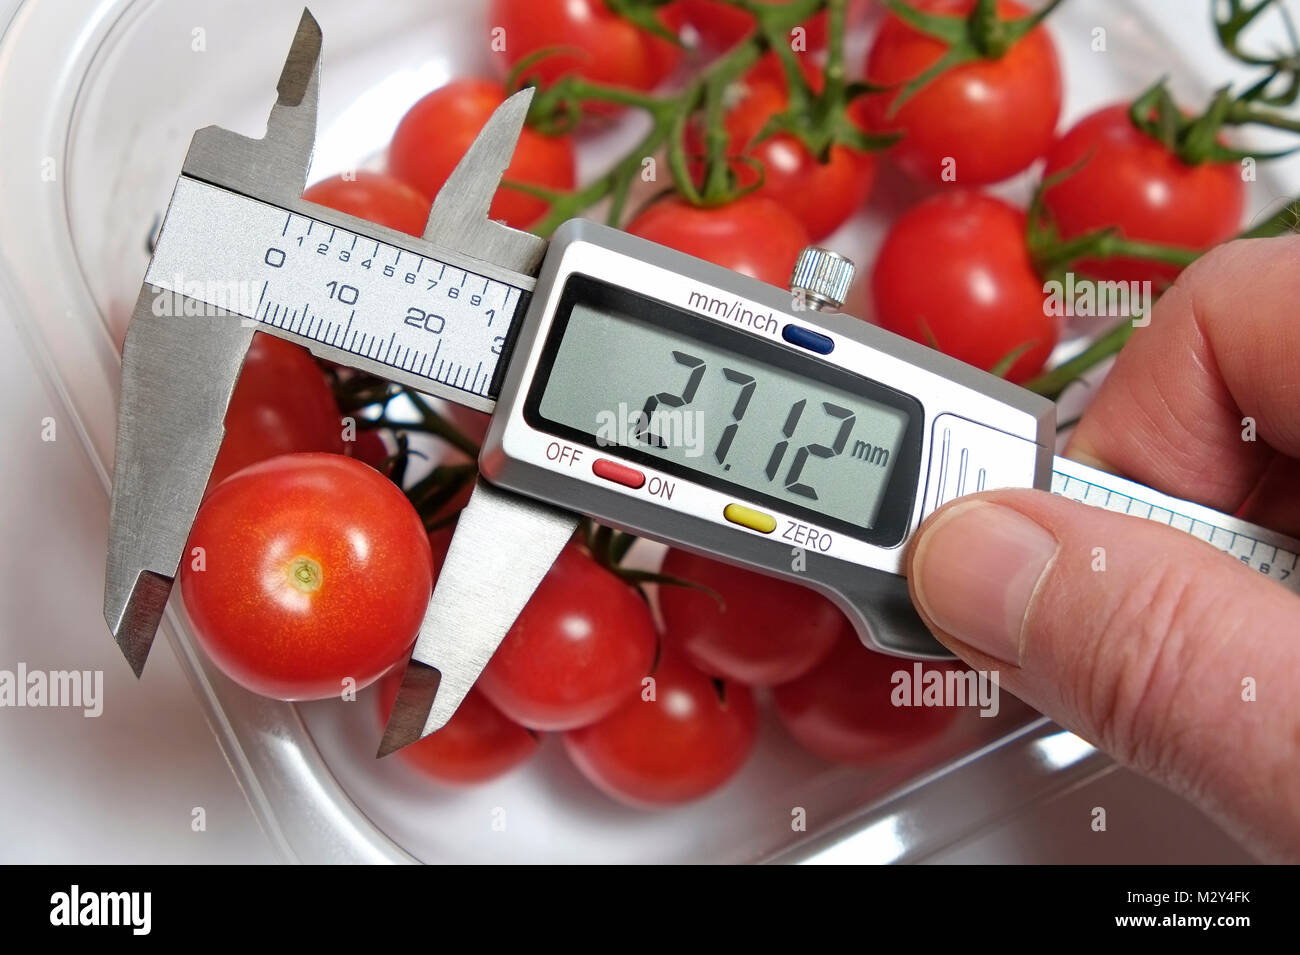 measuring tomato with digital callipers Stock Photo